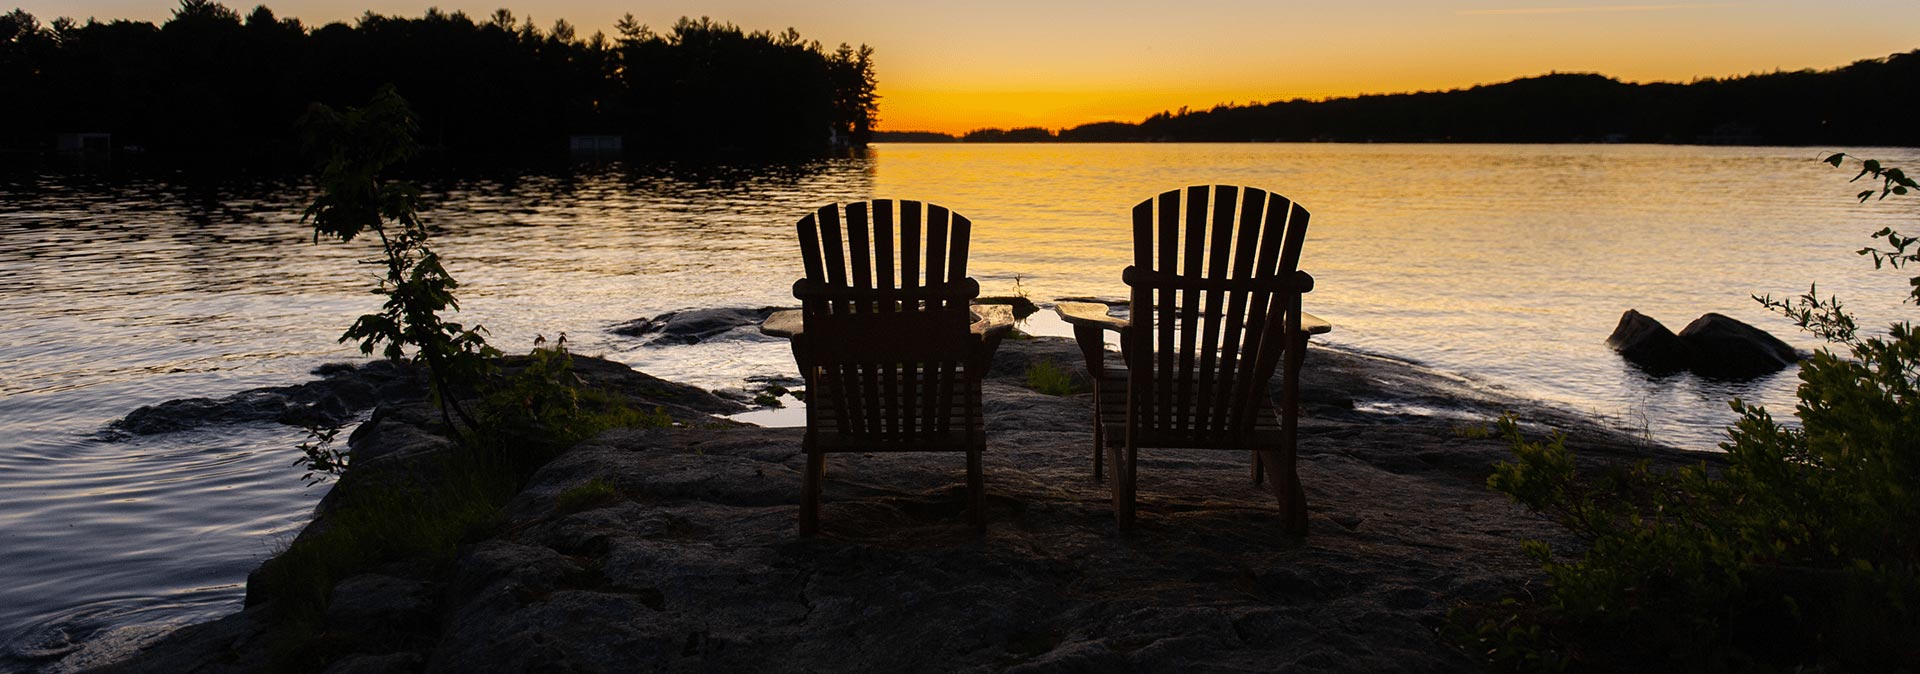 Gettapix Stock Images - Adirondack chairs on a rock facing a lake at sunset